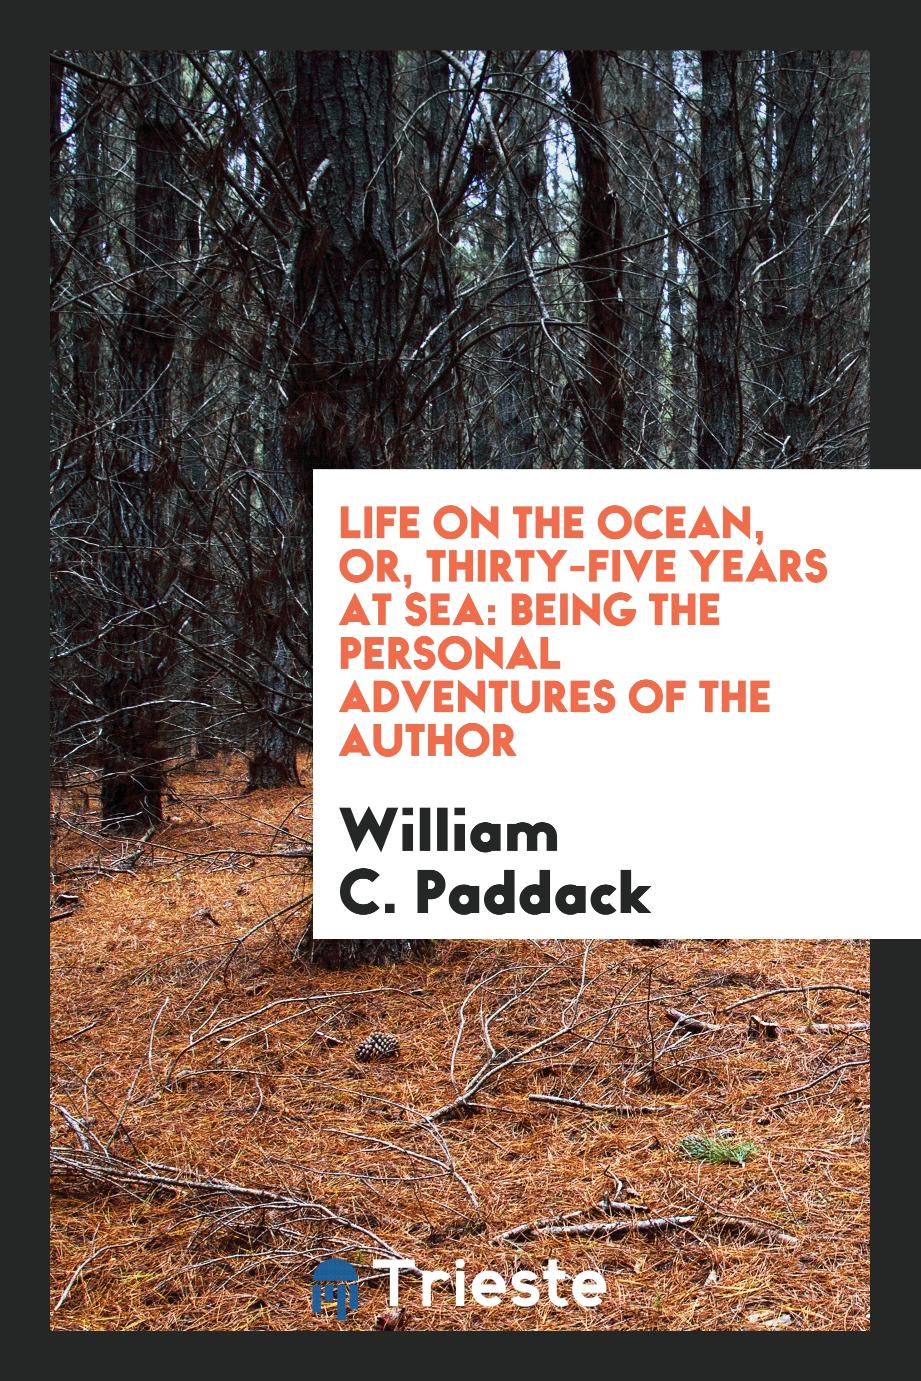 Life on the ocean, or, Thirty-five years at sea: being the personal adventures of the author